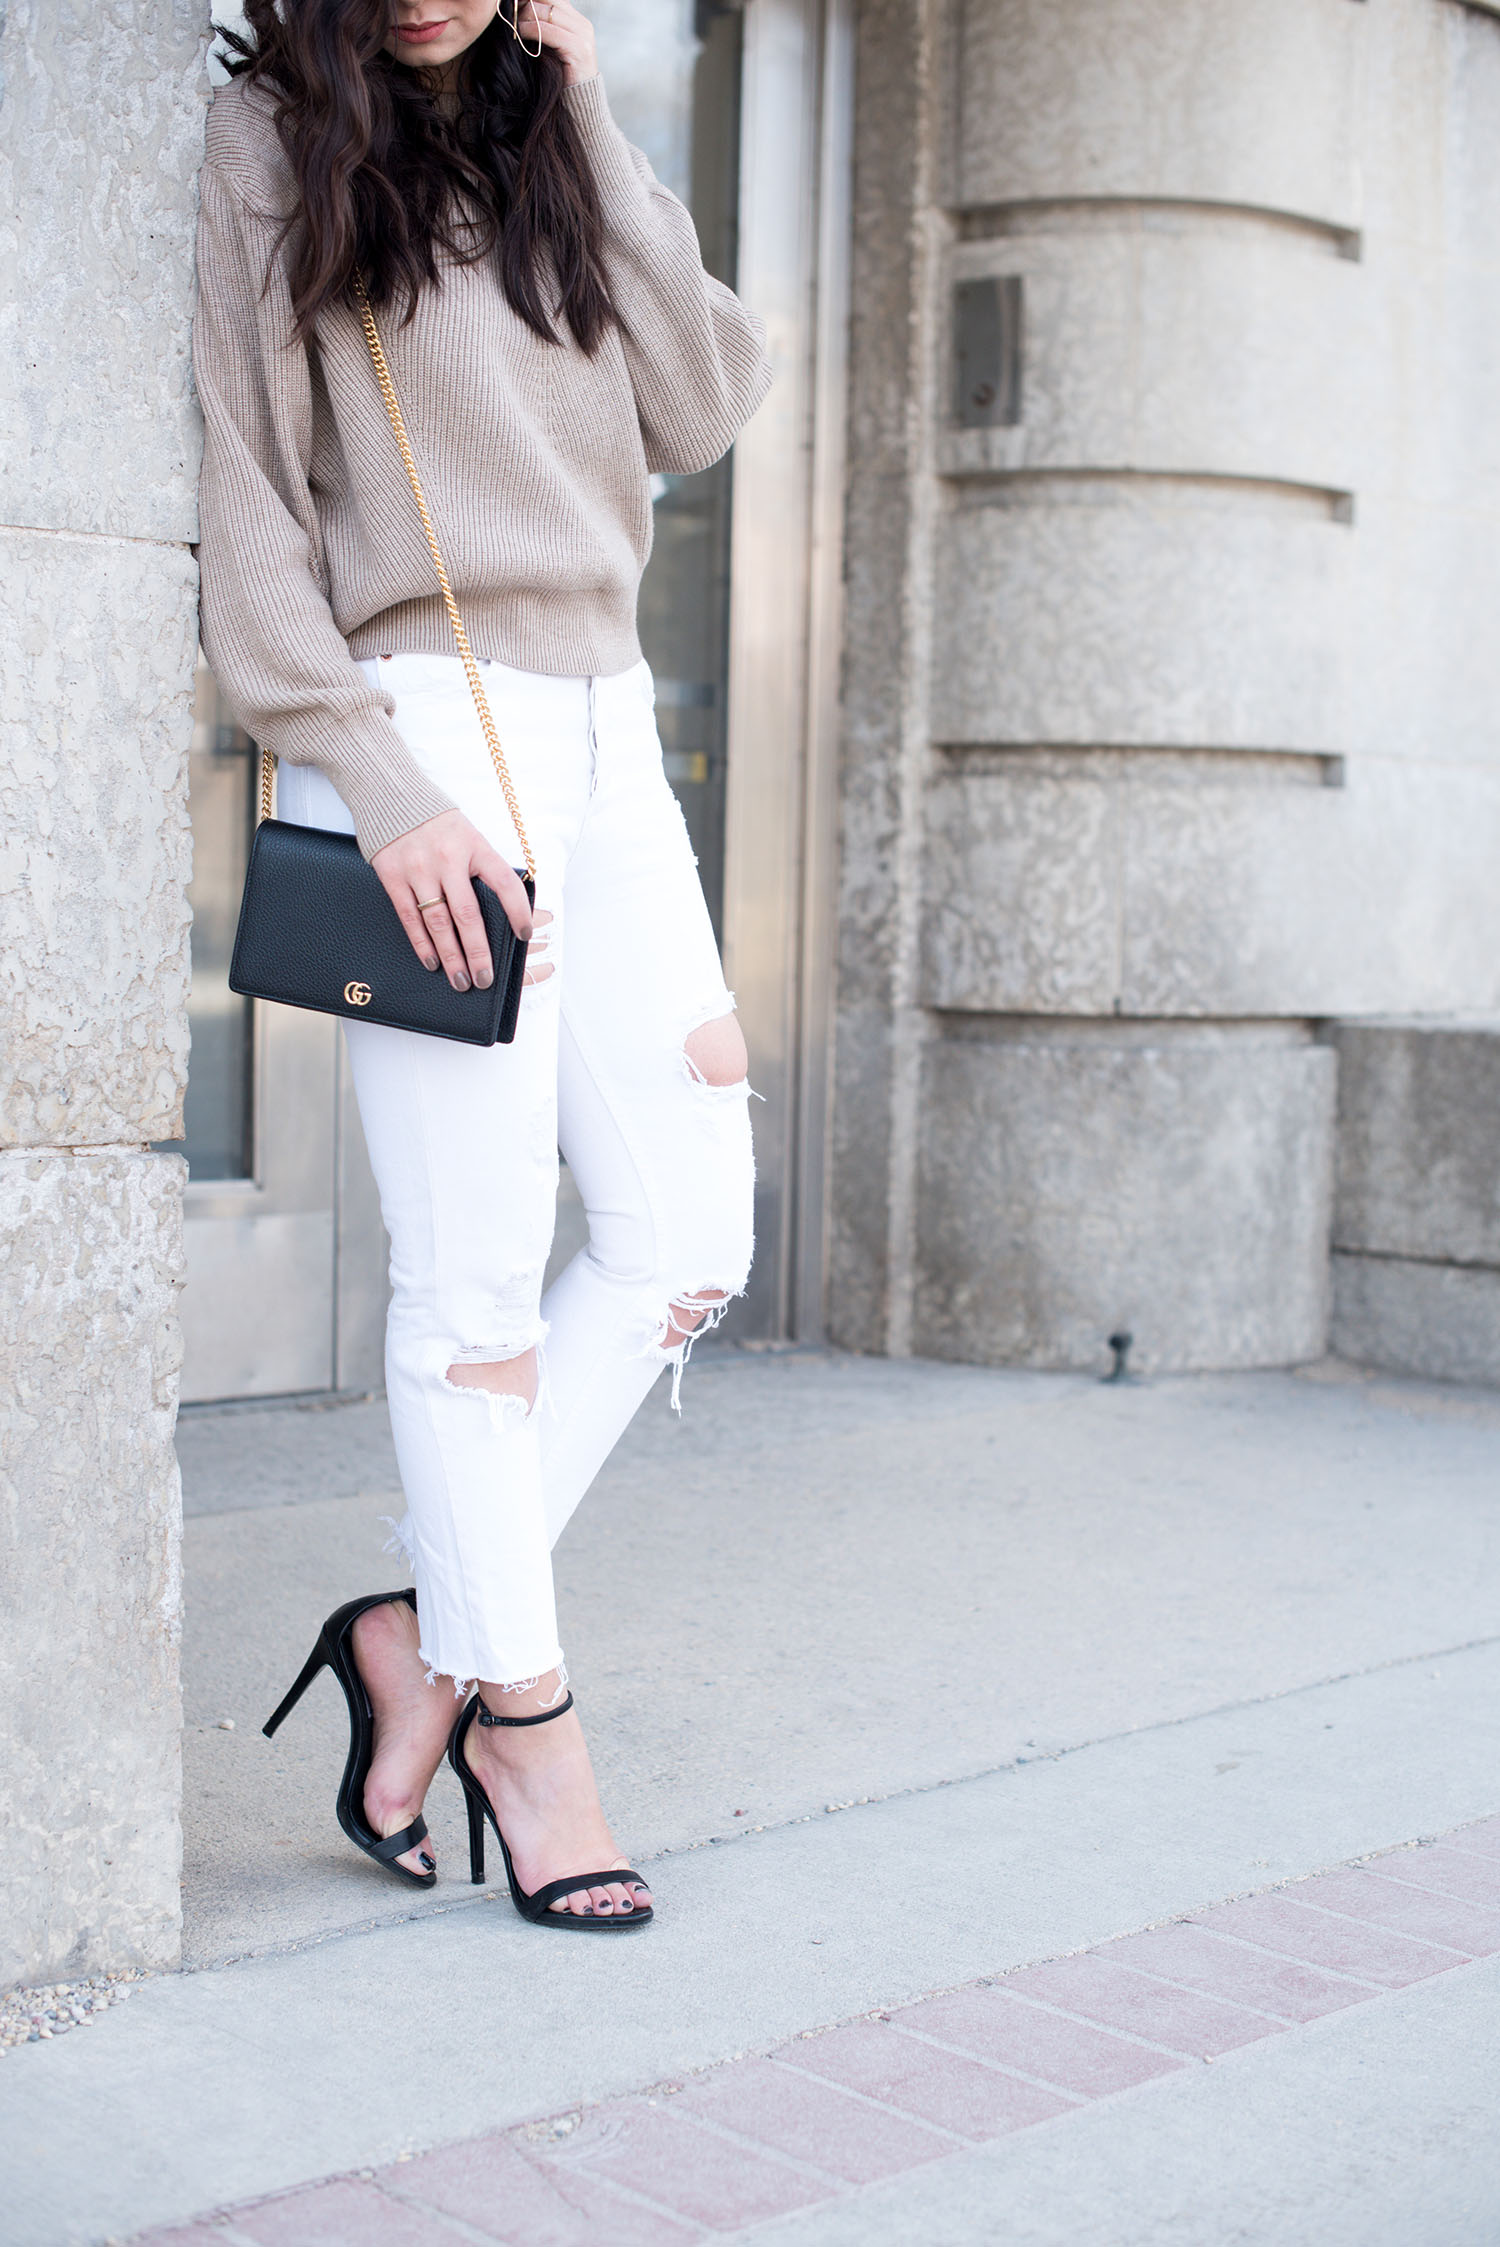 Outfit details on top Winnipeg fashion blogger Cee Fardoe of Coco & Vera, including Steve Madden Stecy sandals and a black leather Gucci handbag